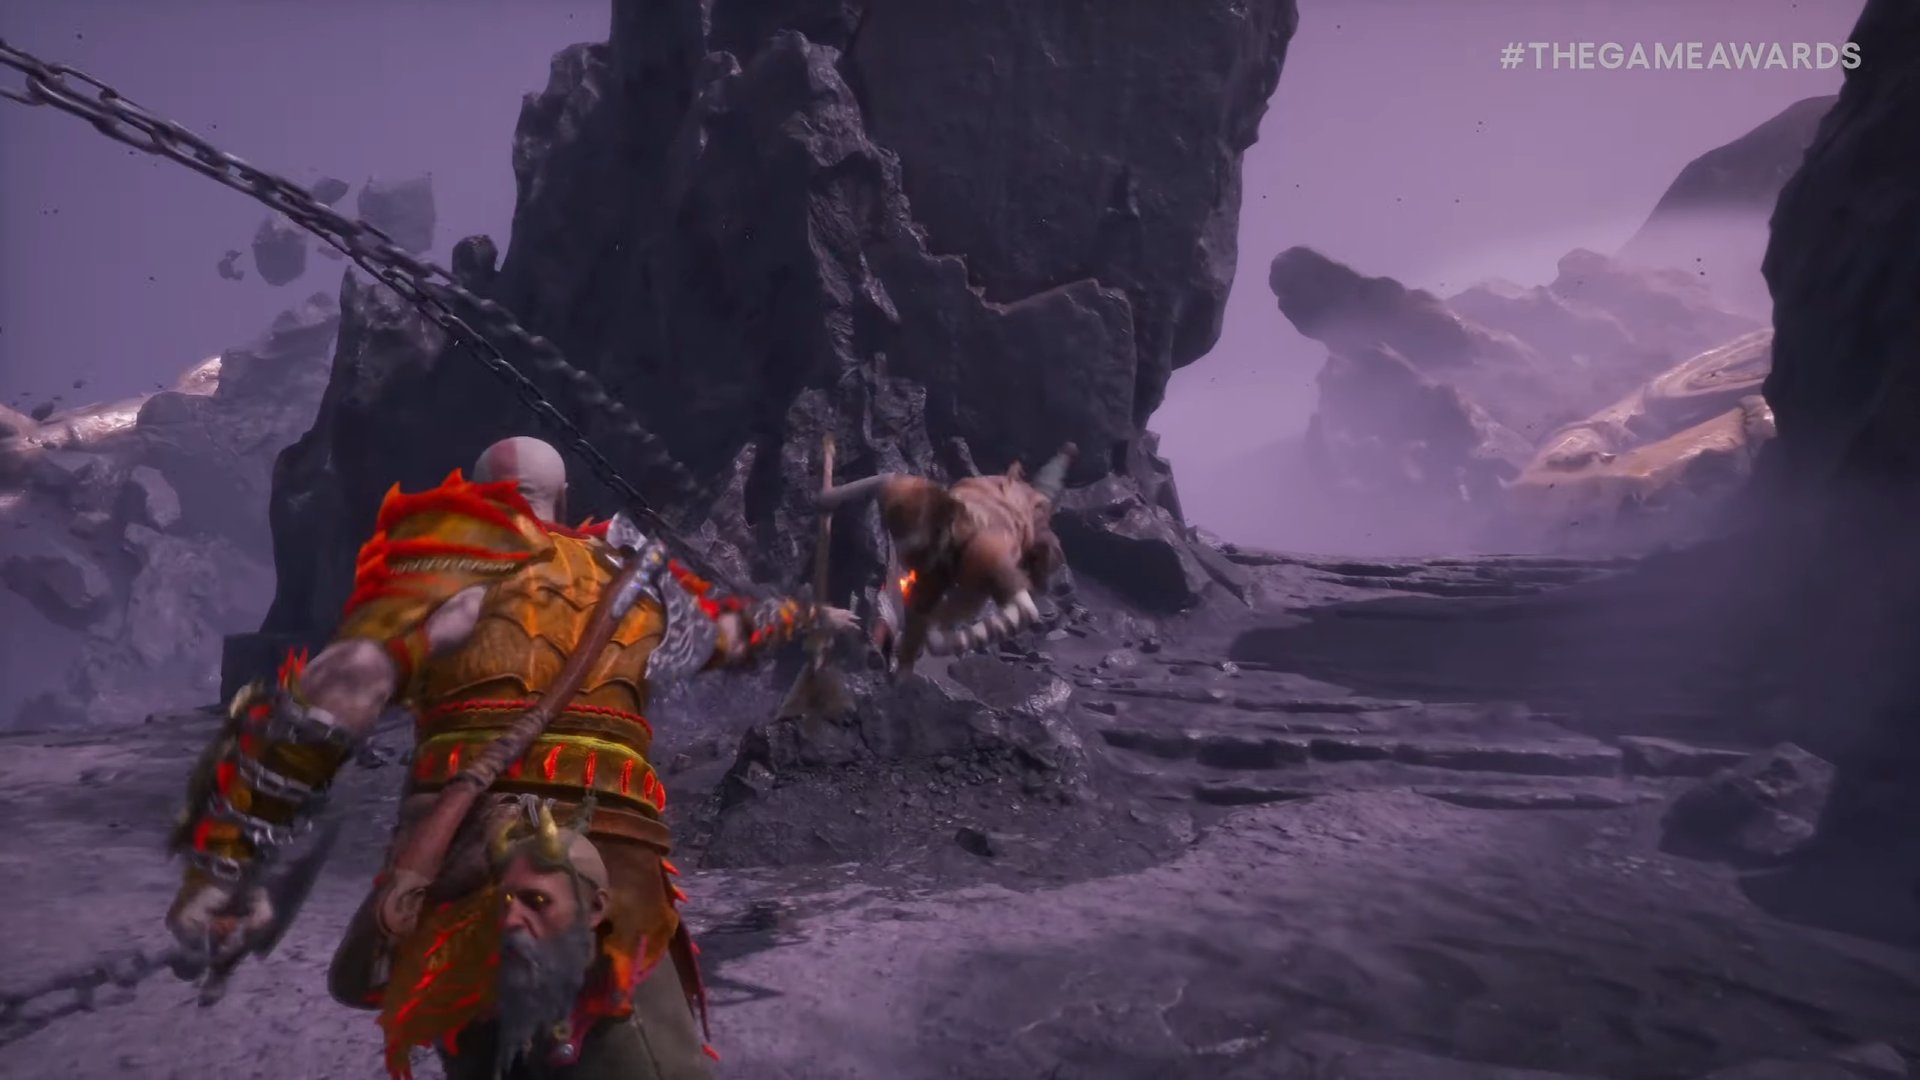 Valhalla is a new roguelike mode for God of War: Ragnarok, out free next  week on PS5 - Neowin